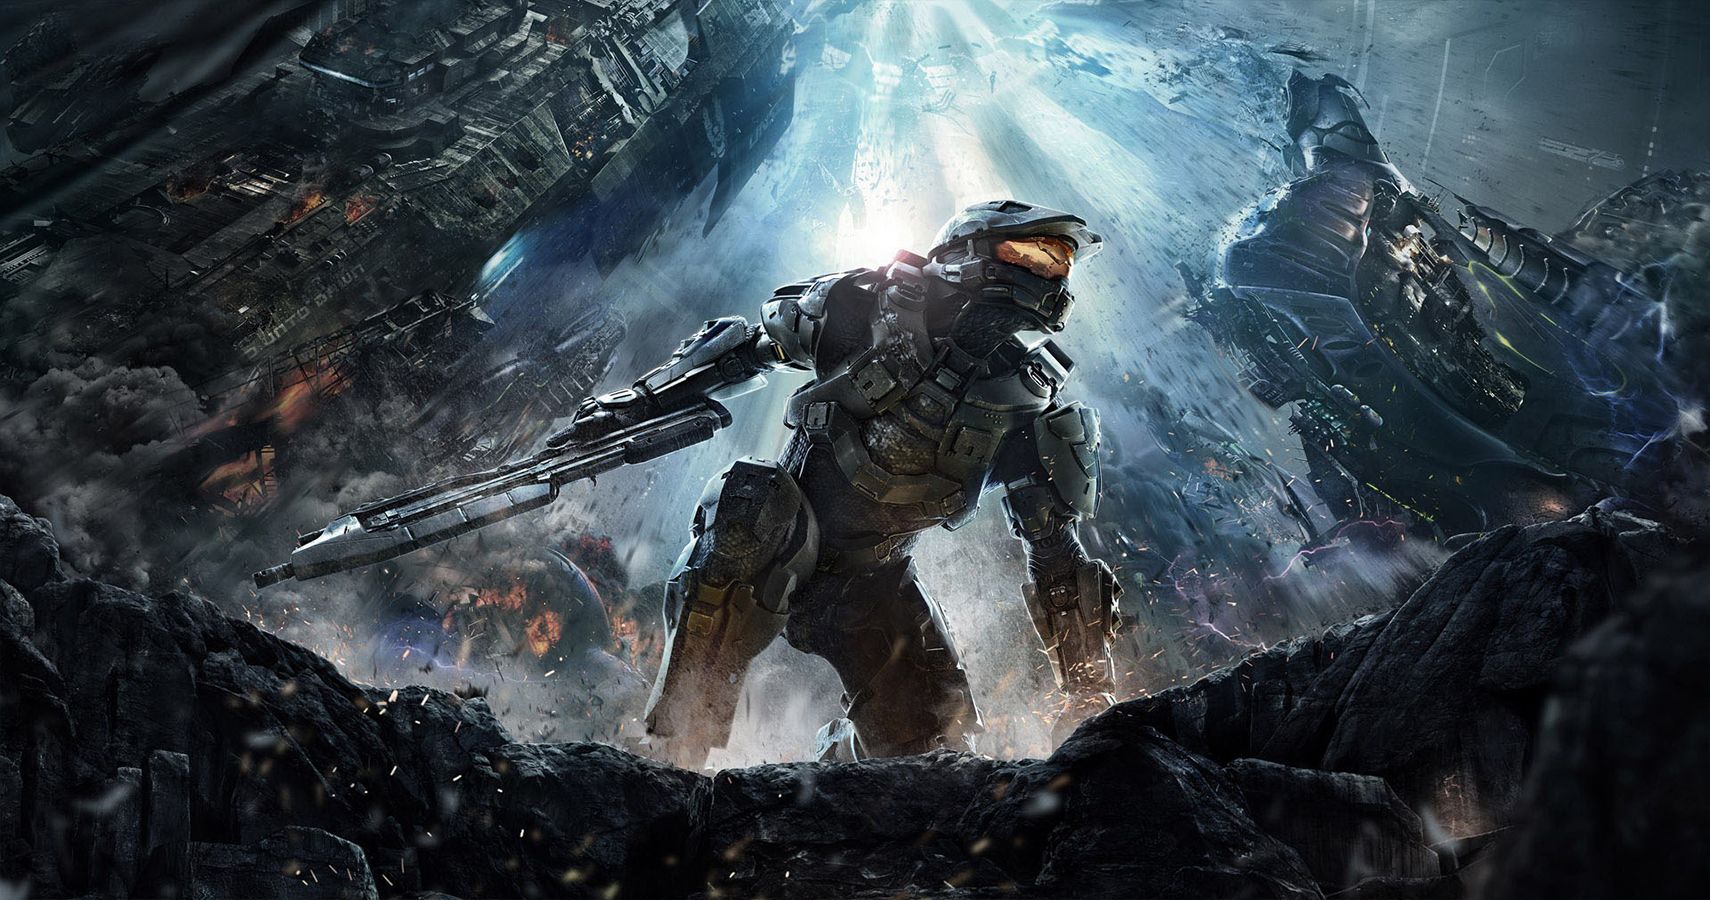 Leaked images of the Halo TV series have emerged